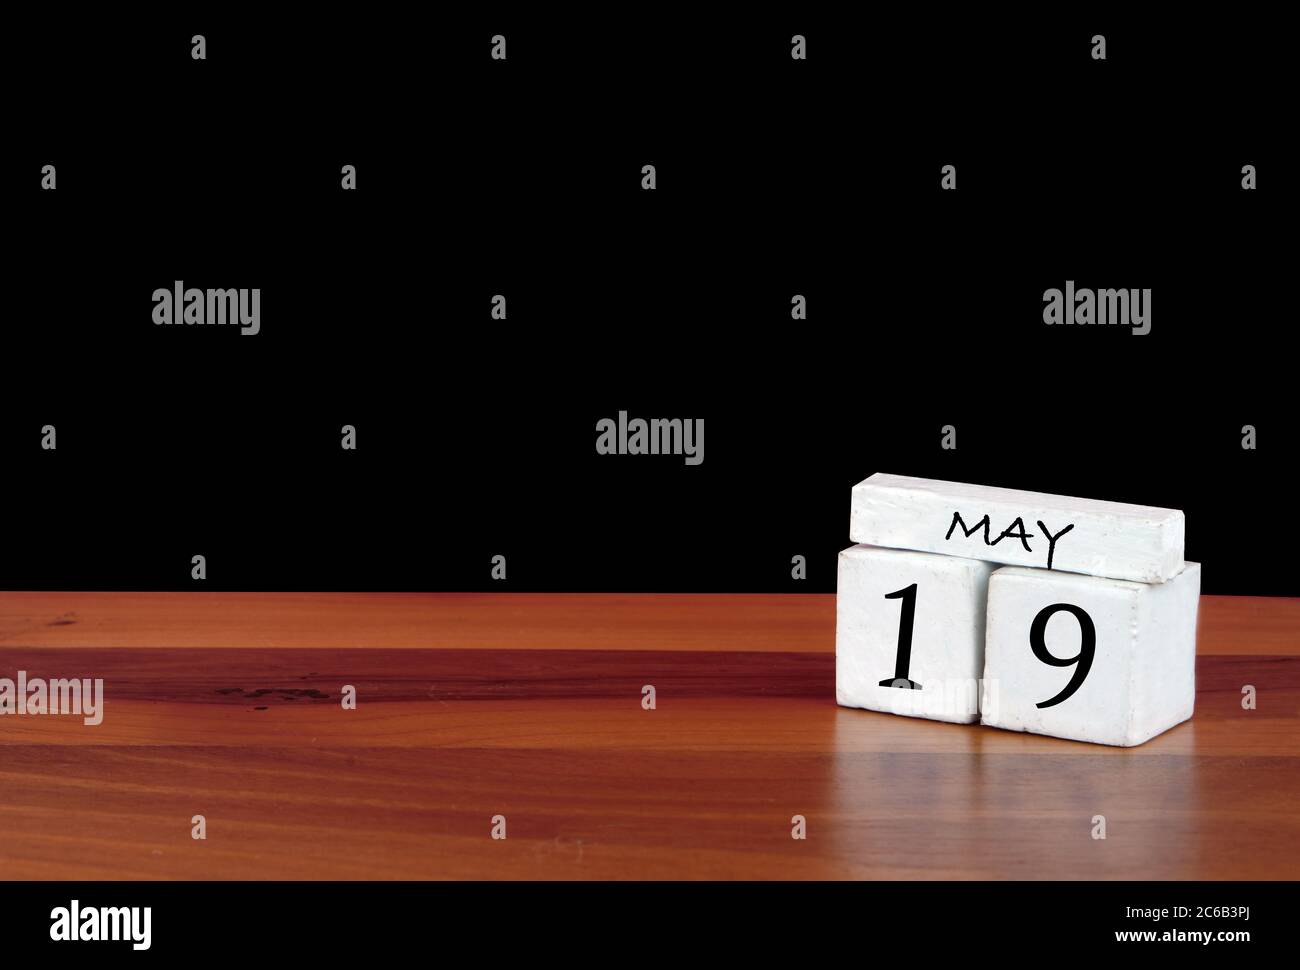 19 May calendar month. 19 days of the month. Reflected calendar on wooden floor with black background Stock Photo